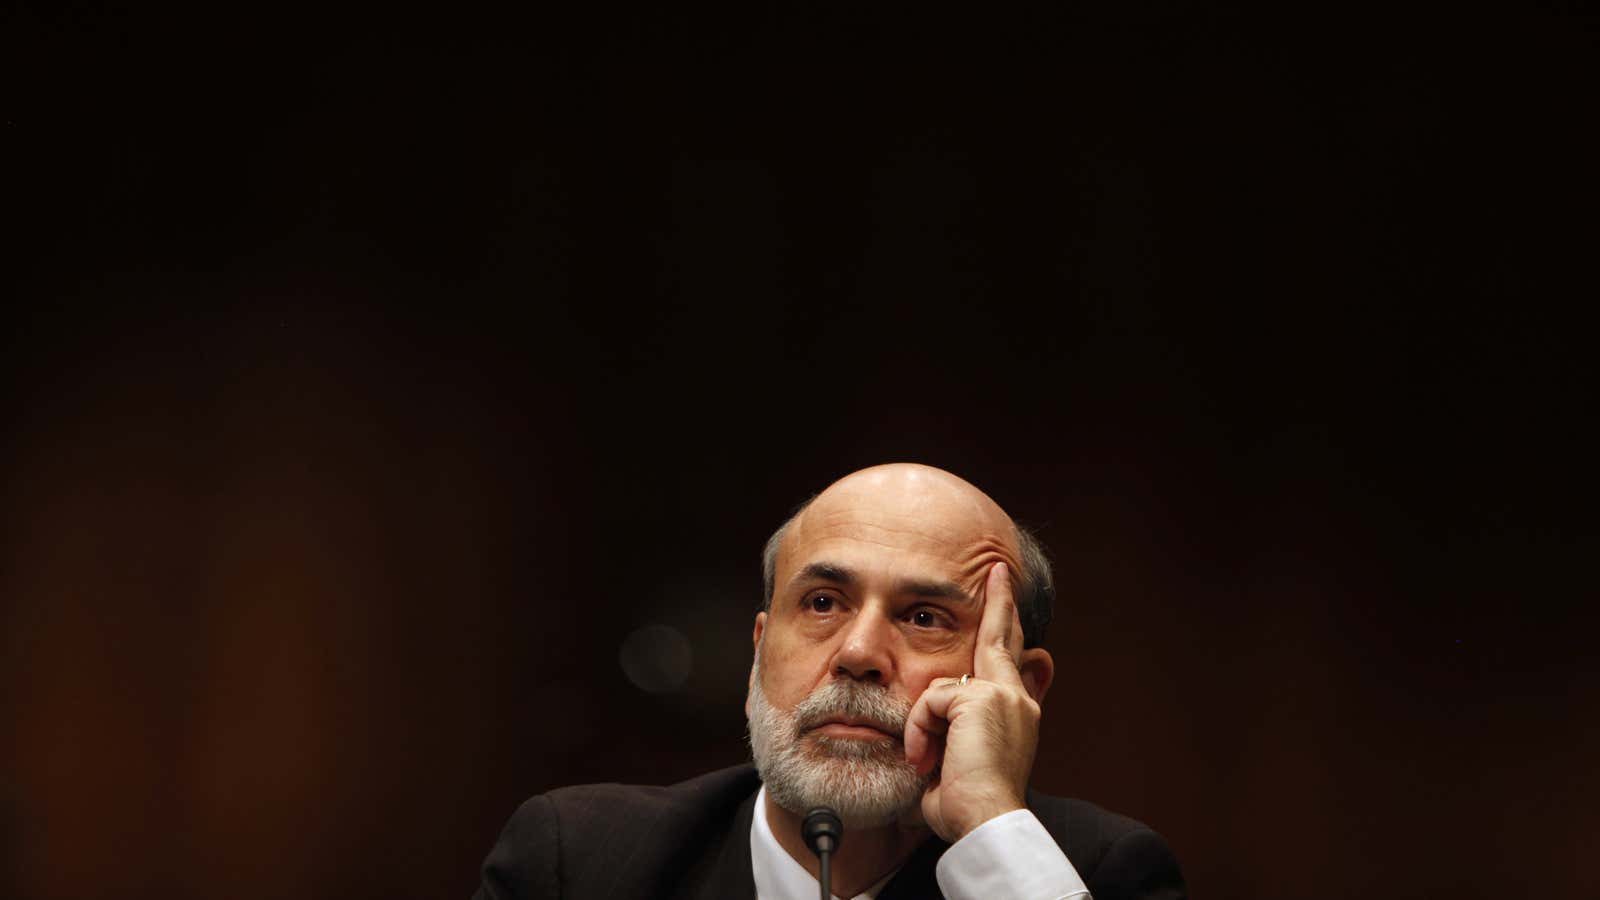 The Bernanke era at the Fed was one for the history books.